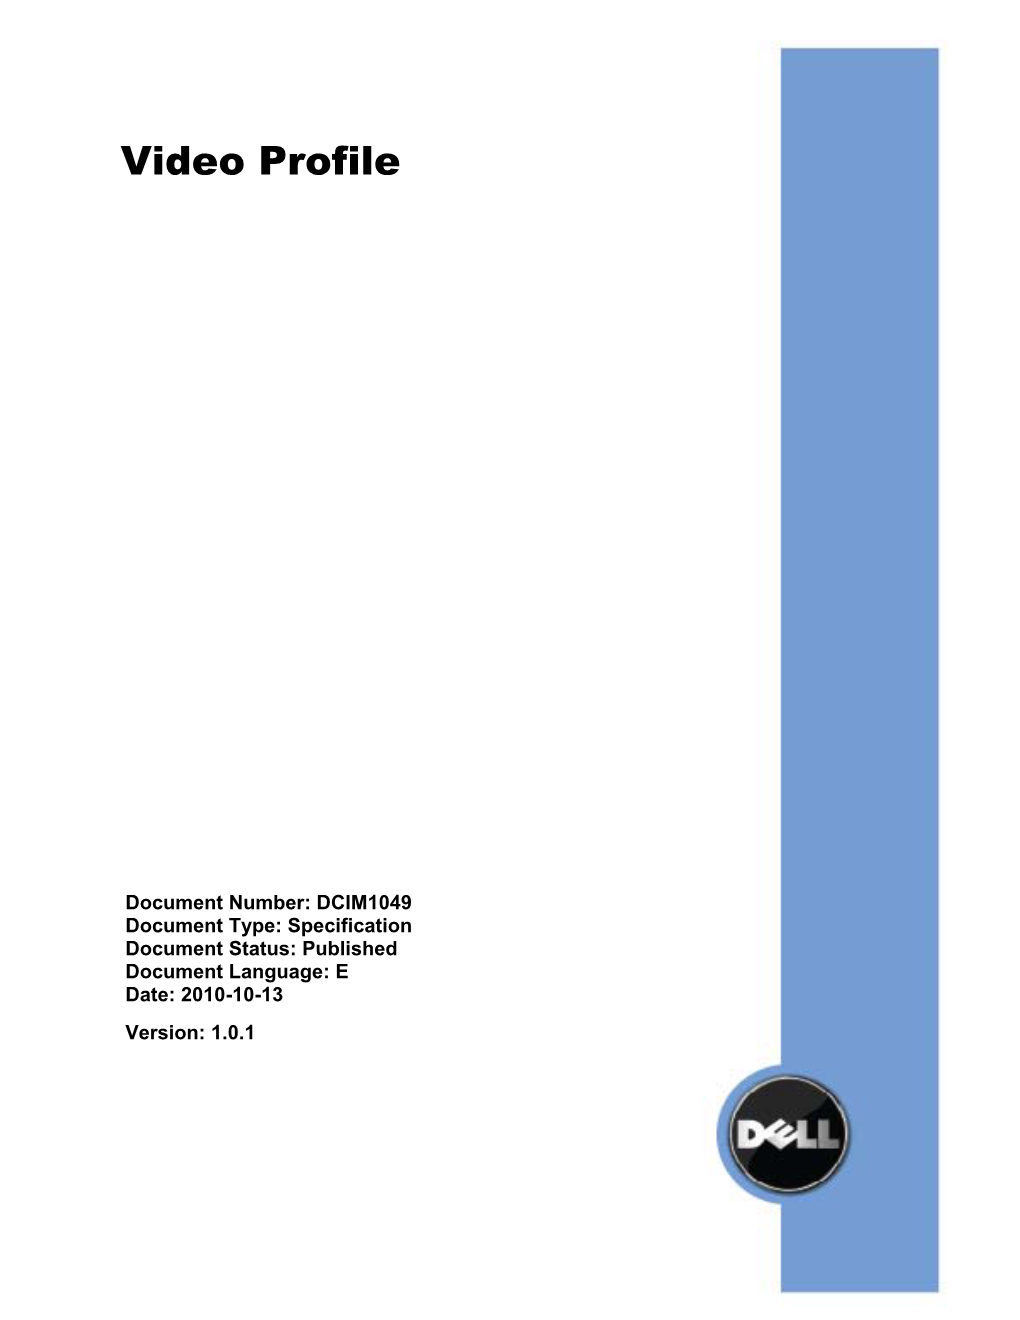 Dell Video Profile Is a Component Profile That Contains the Dell Specific Implementation Requirements for Video Controller View